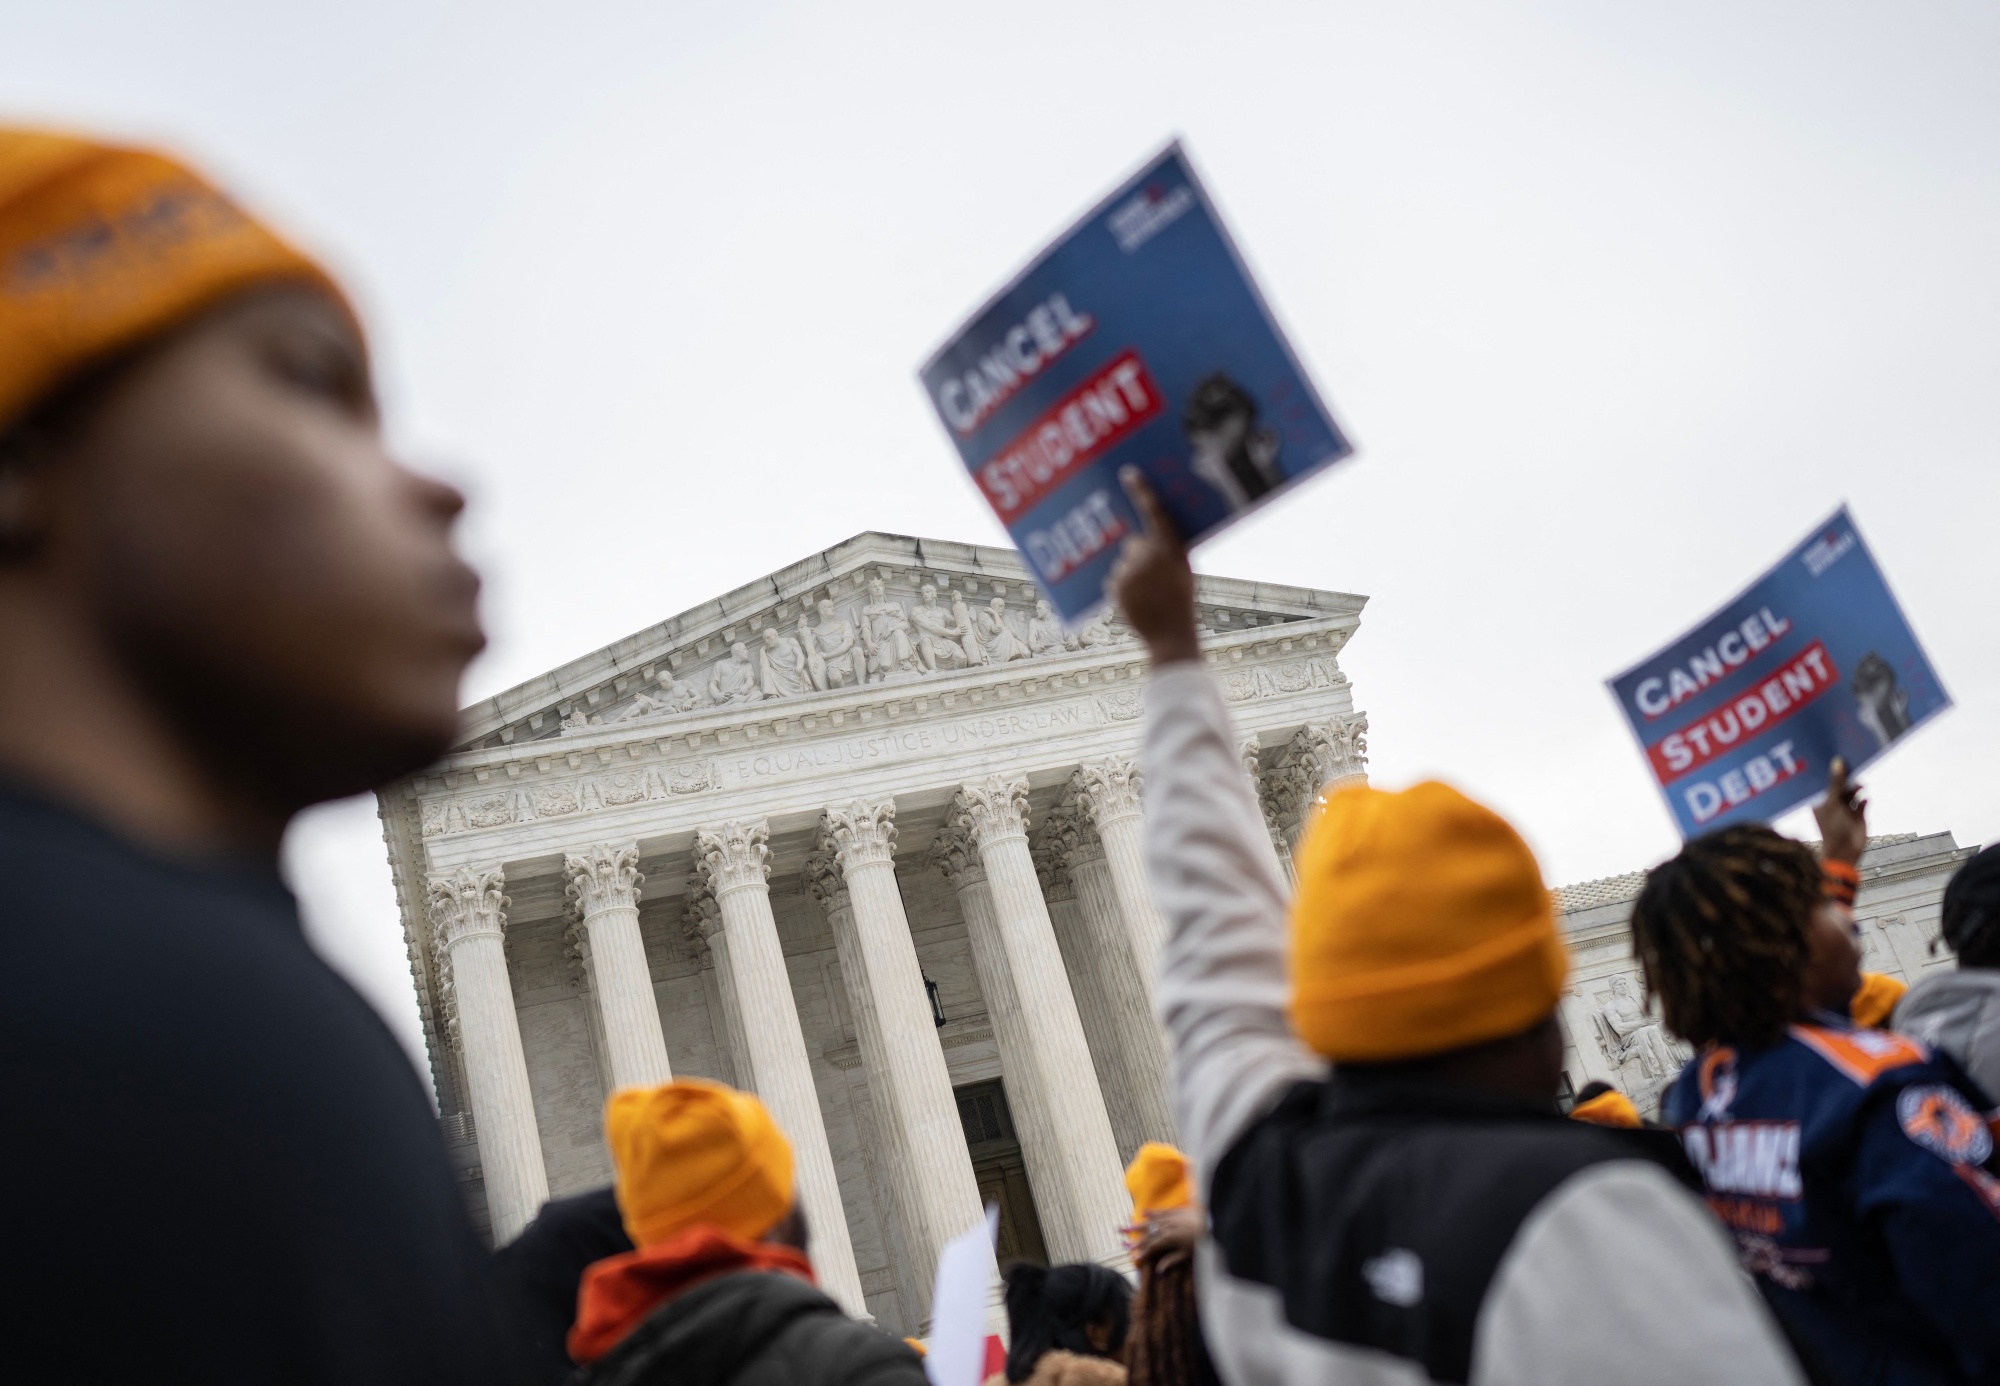 People protest in front of the Supreme Court&nbsp;in Washington, DC&nbsp;on February 28.